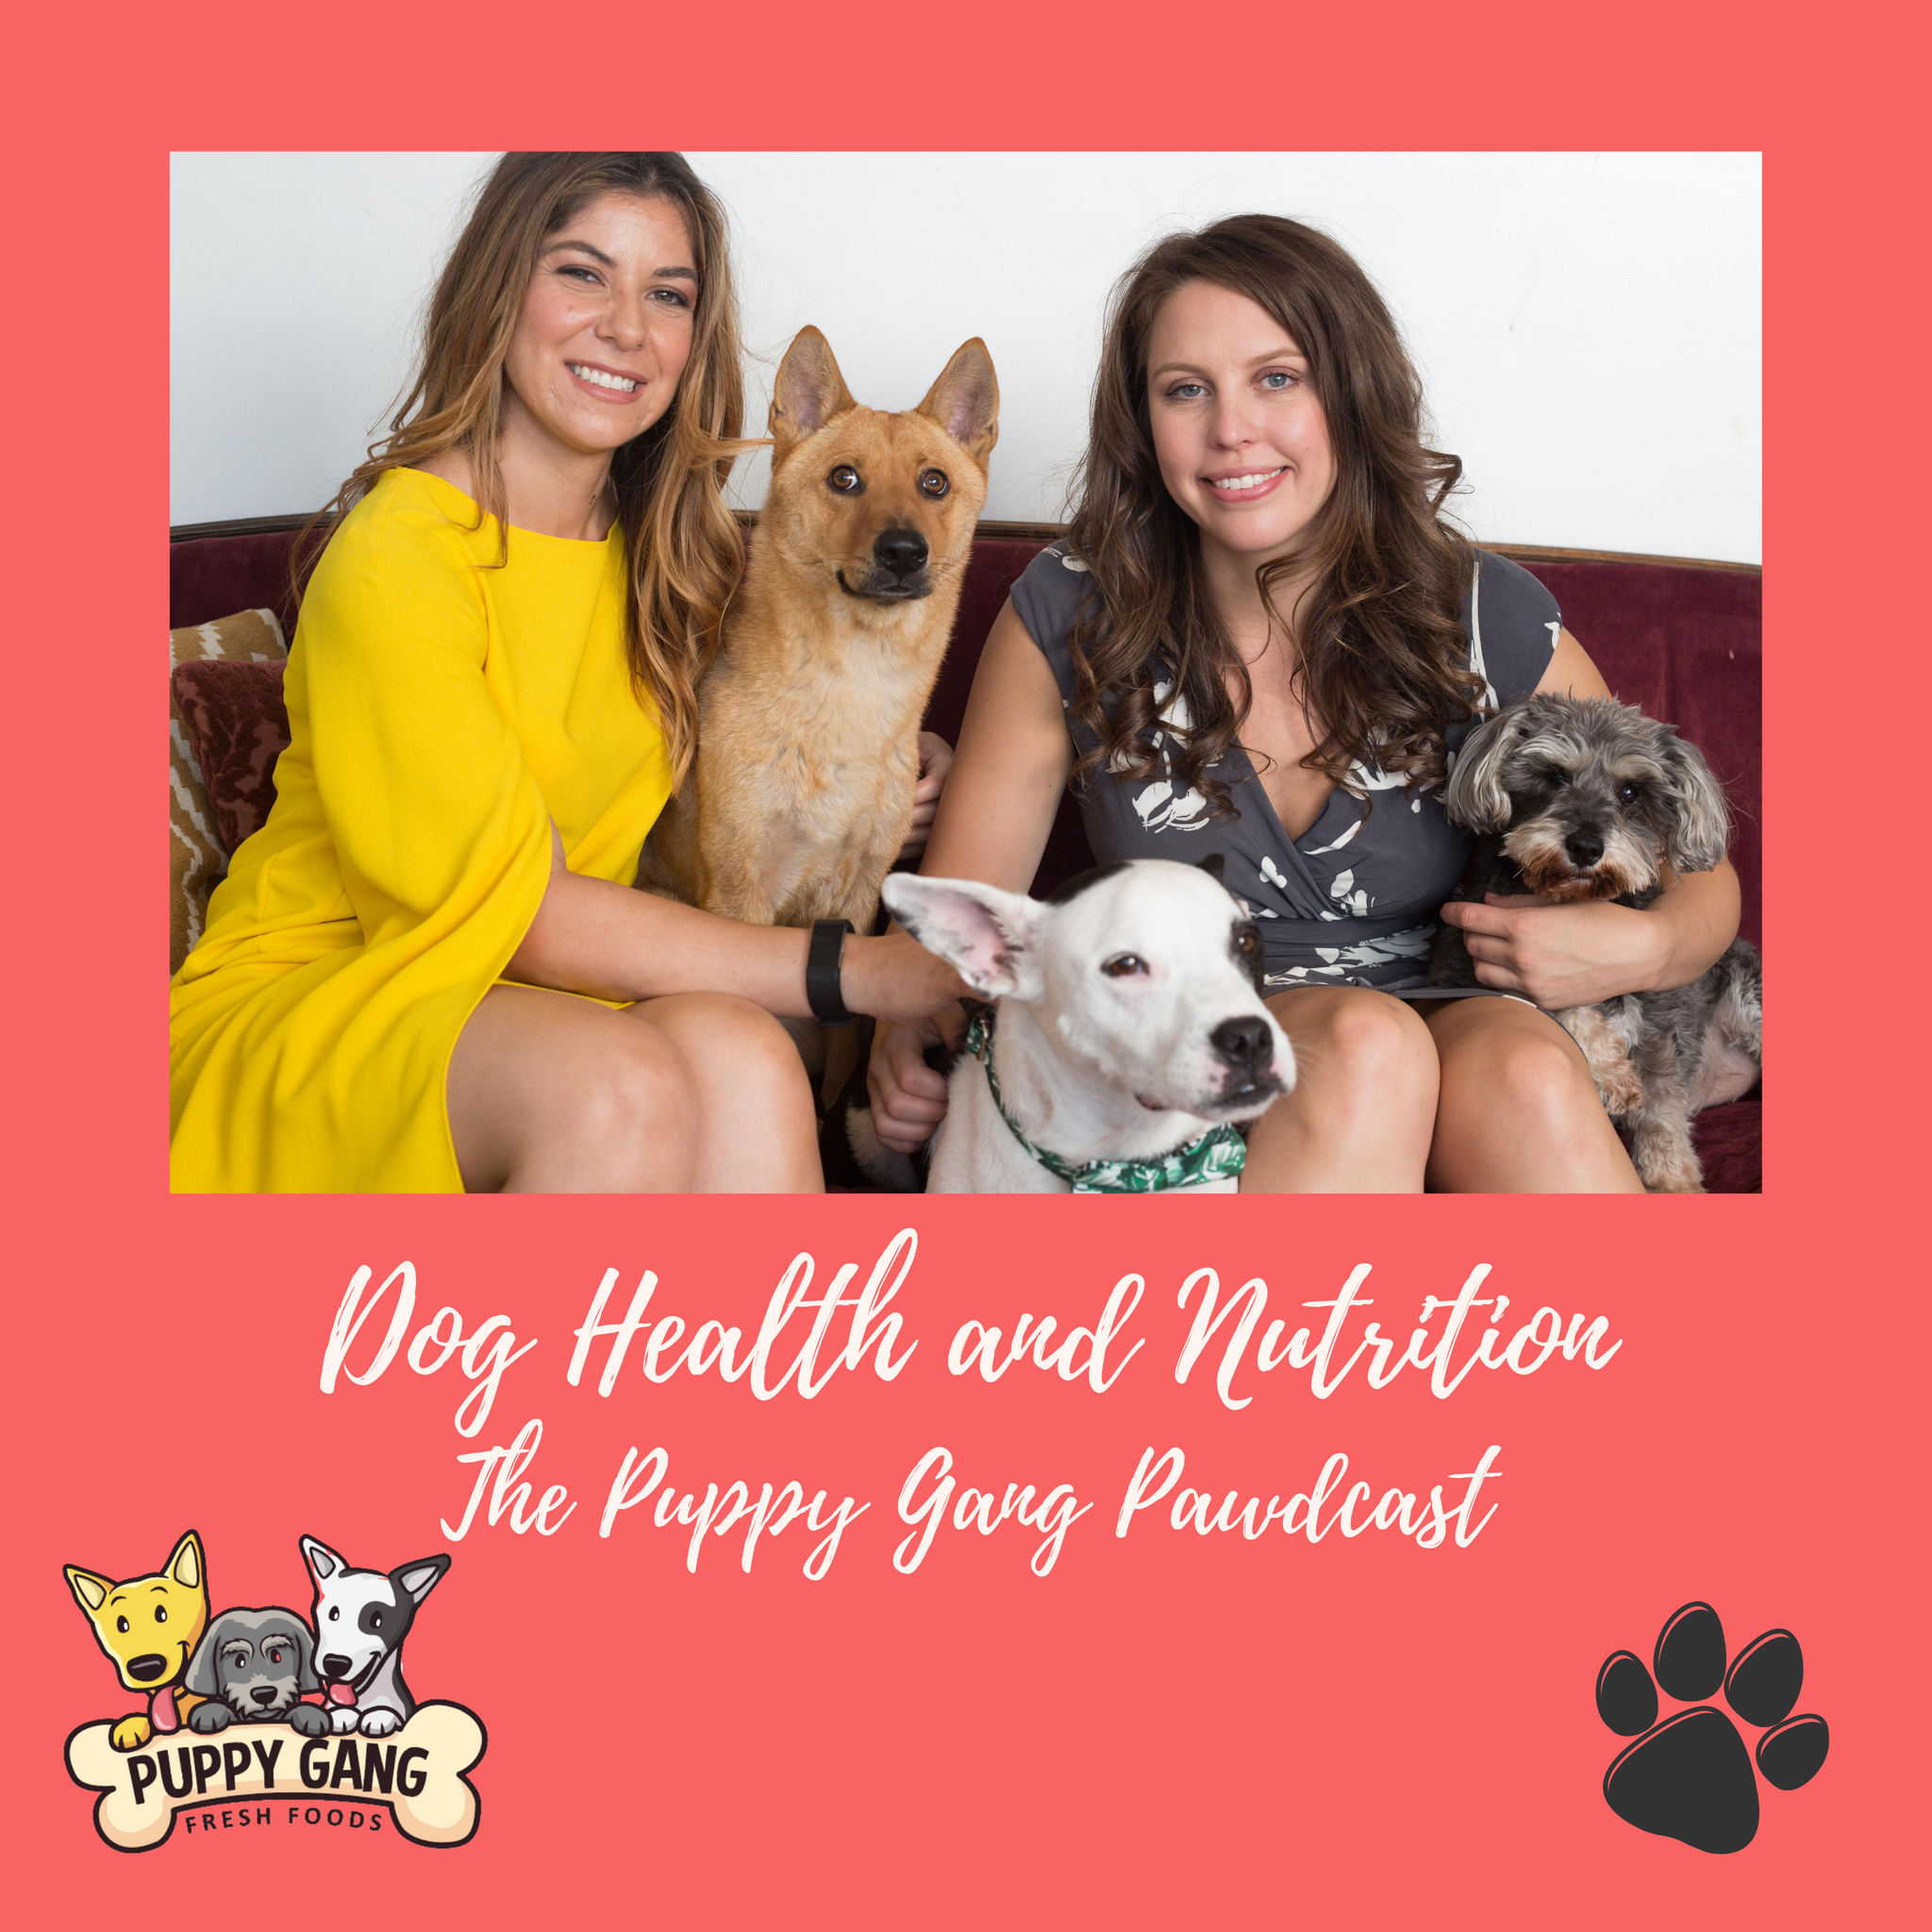 Dog Health and Nutrition: The Puppy Gang Pawdcast-Episode 1: Meet the Puppy Gang!